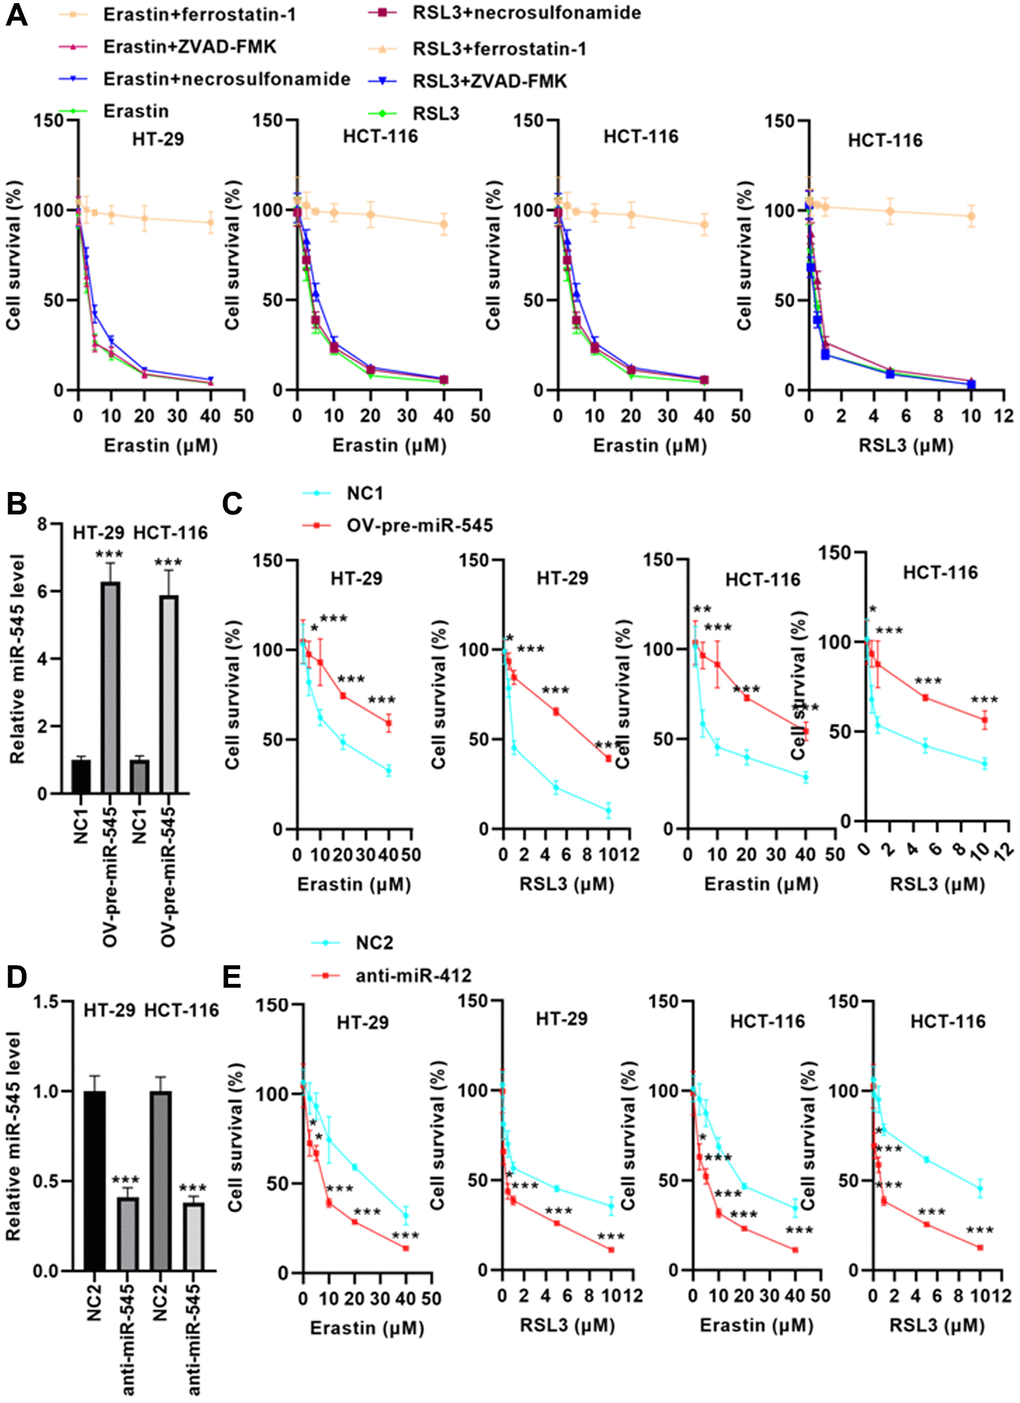 miR-545 increased erastin and RSL3-induced ferroptosis in HT-29 and HCT-116 cells. (A) Erastin and RSL3 significantly decreased cell survival rate in a dose-dependent manner. (B) RT-PCR showed that transfection with OV-pre-miR-545 significantly increased miR-545 levels in HT-29 and HCT-116 cells. (C) Pretreatment with miR-545 significantly increased HT-29 and HCT-116 cell survival rates. (D) Transfection with anti-miR-545 significantly reduced miR-545 levels in HT-29 and HCT-116 cells. (E) CCK-8 assay demonstrated that miR-545 knockdown further reduced the erastin and RSL3-induced decrease in cell survival rate. *p **p ***p 